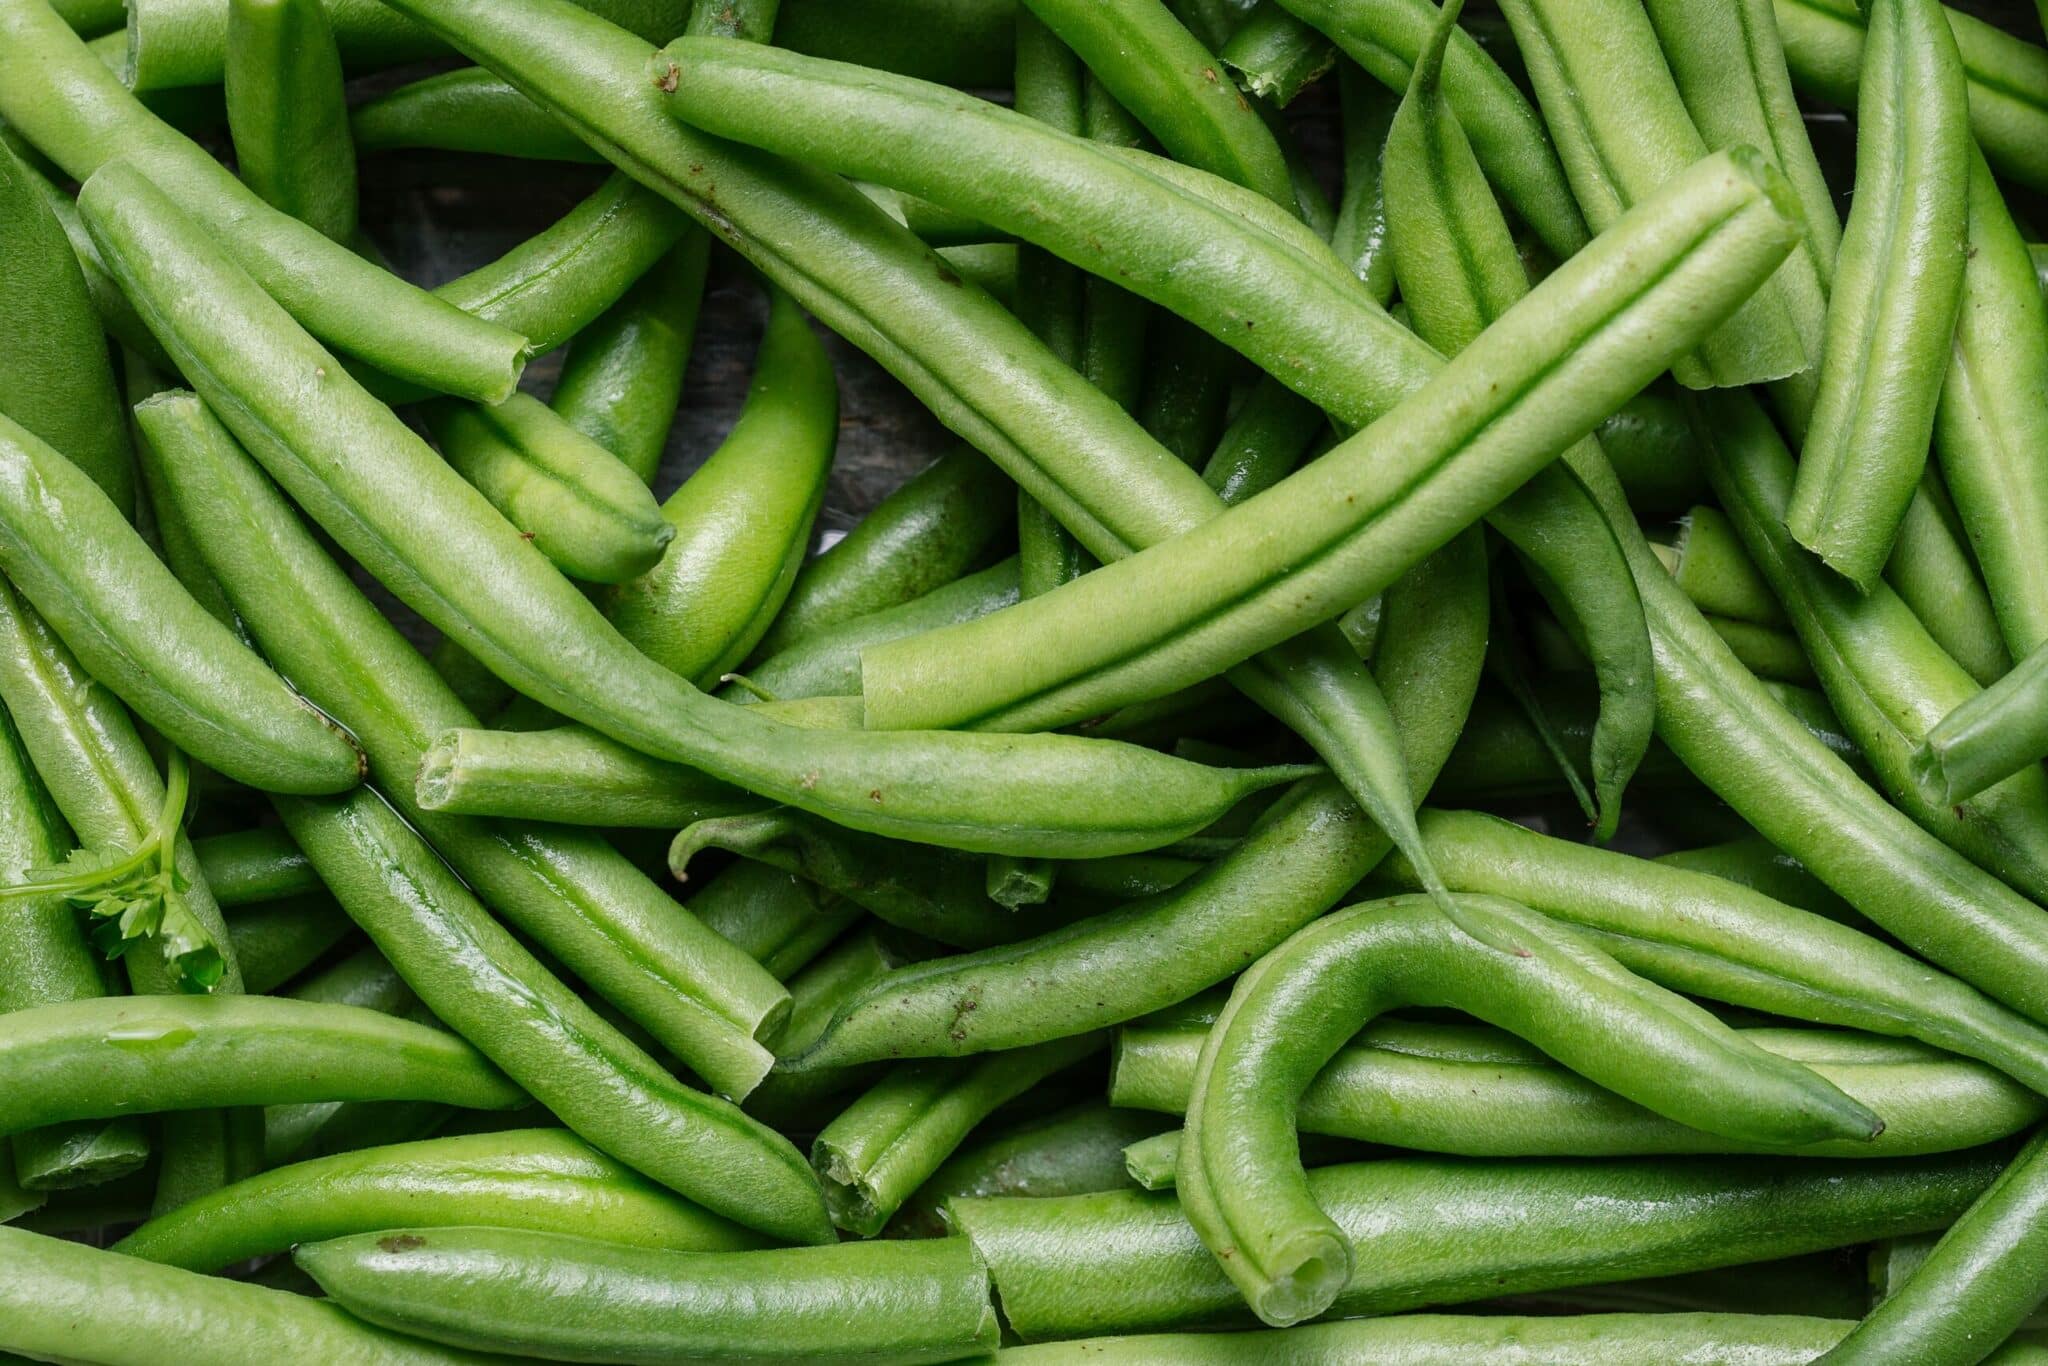 How to Make Canned Green Beans Taste Good?